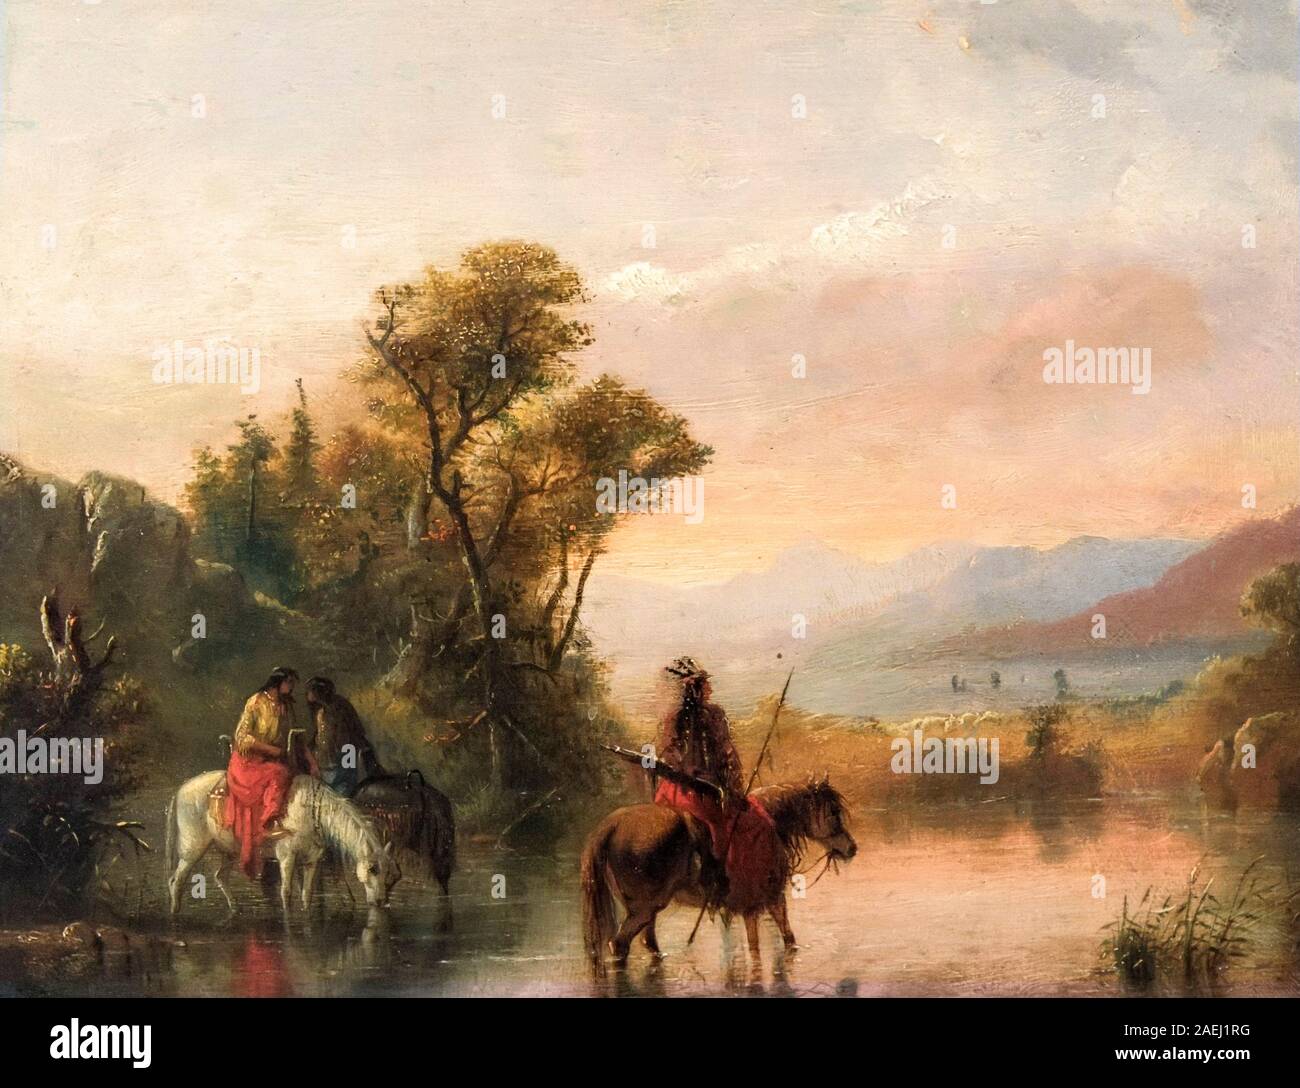 Indians Watering Horses by Alfred Jacob Miller (1810-1874), oil on canvas, 1838 Stock Photo